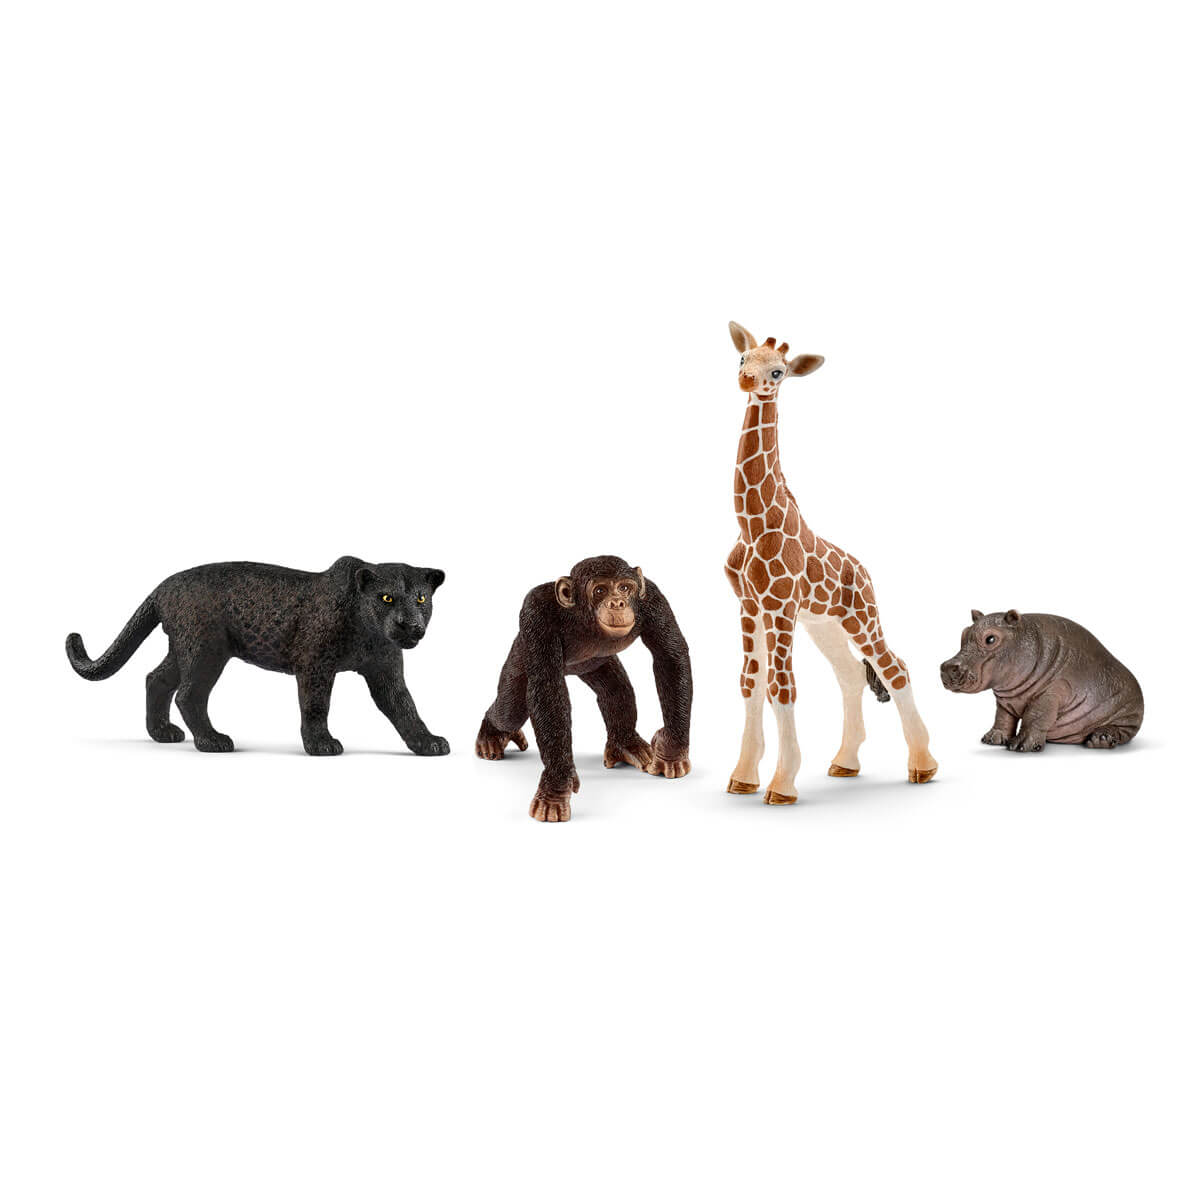  Wild Life Jungle Animal Model Figures Set 4 PCS Snow Leopard  Family Forest Playset Birthday Party Favors Classrooms Gift Toys for Boys  Girls Kids : Toys & Games